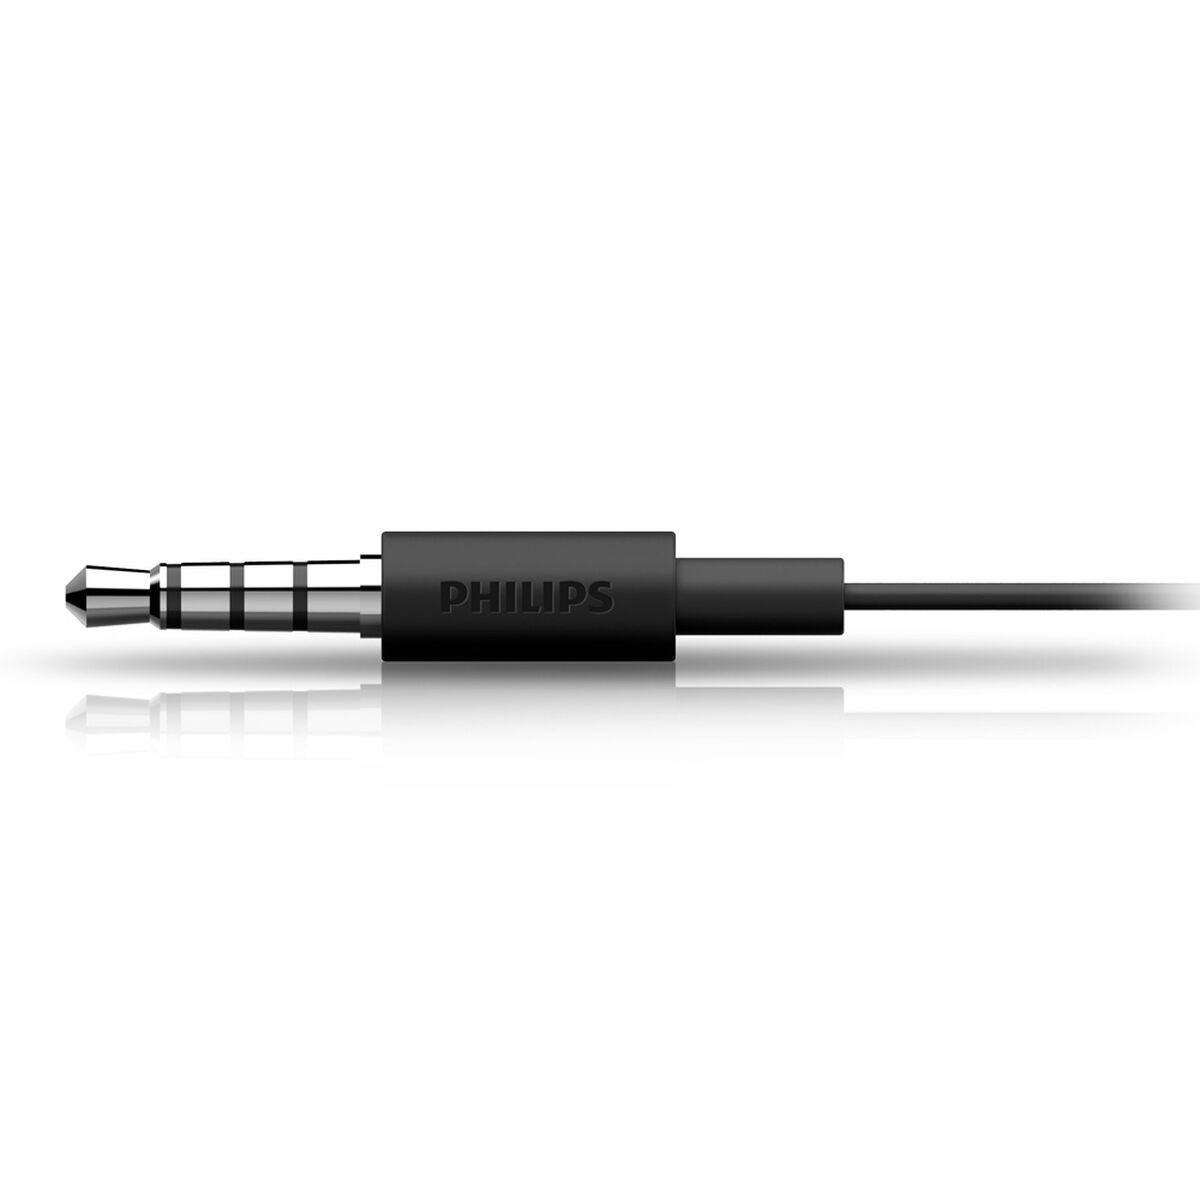 Audífonos In Ear Philips SHE1405BK Negros